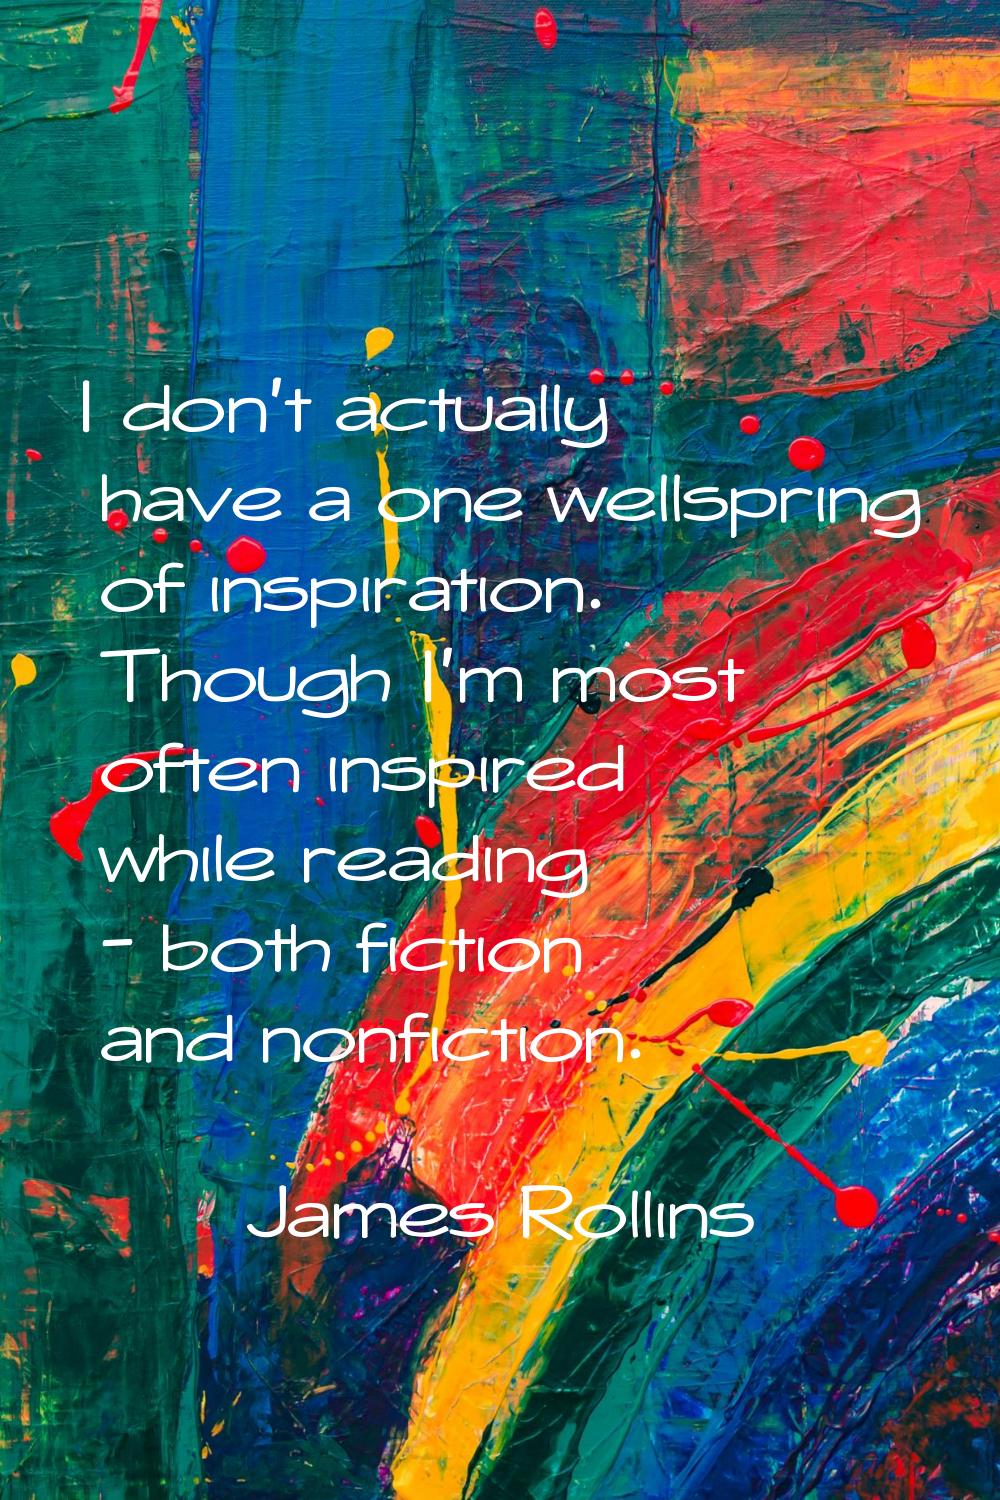 I don't actually have a one wellspring of inspiration. Though I'm most often inspired while reading